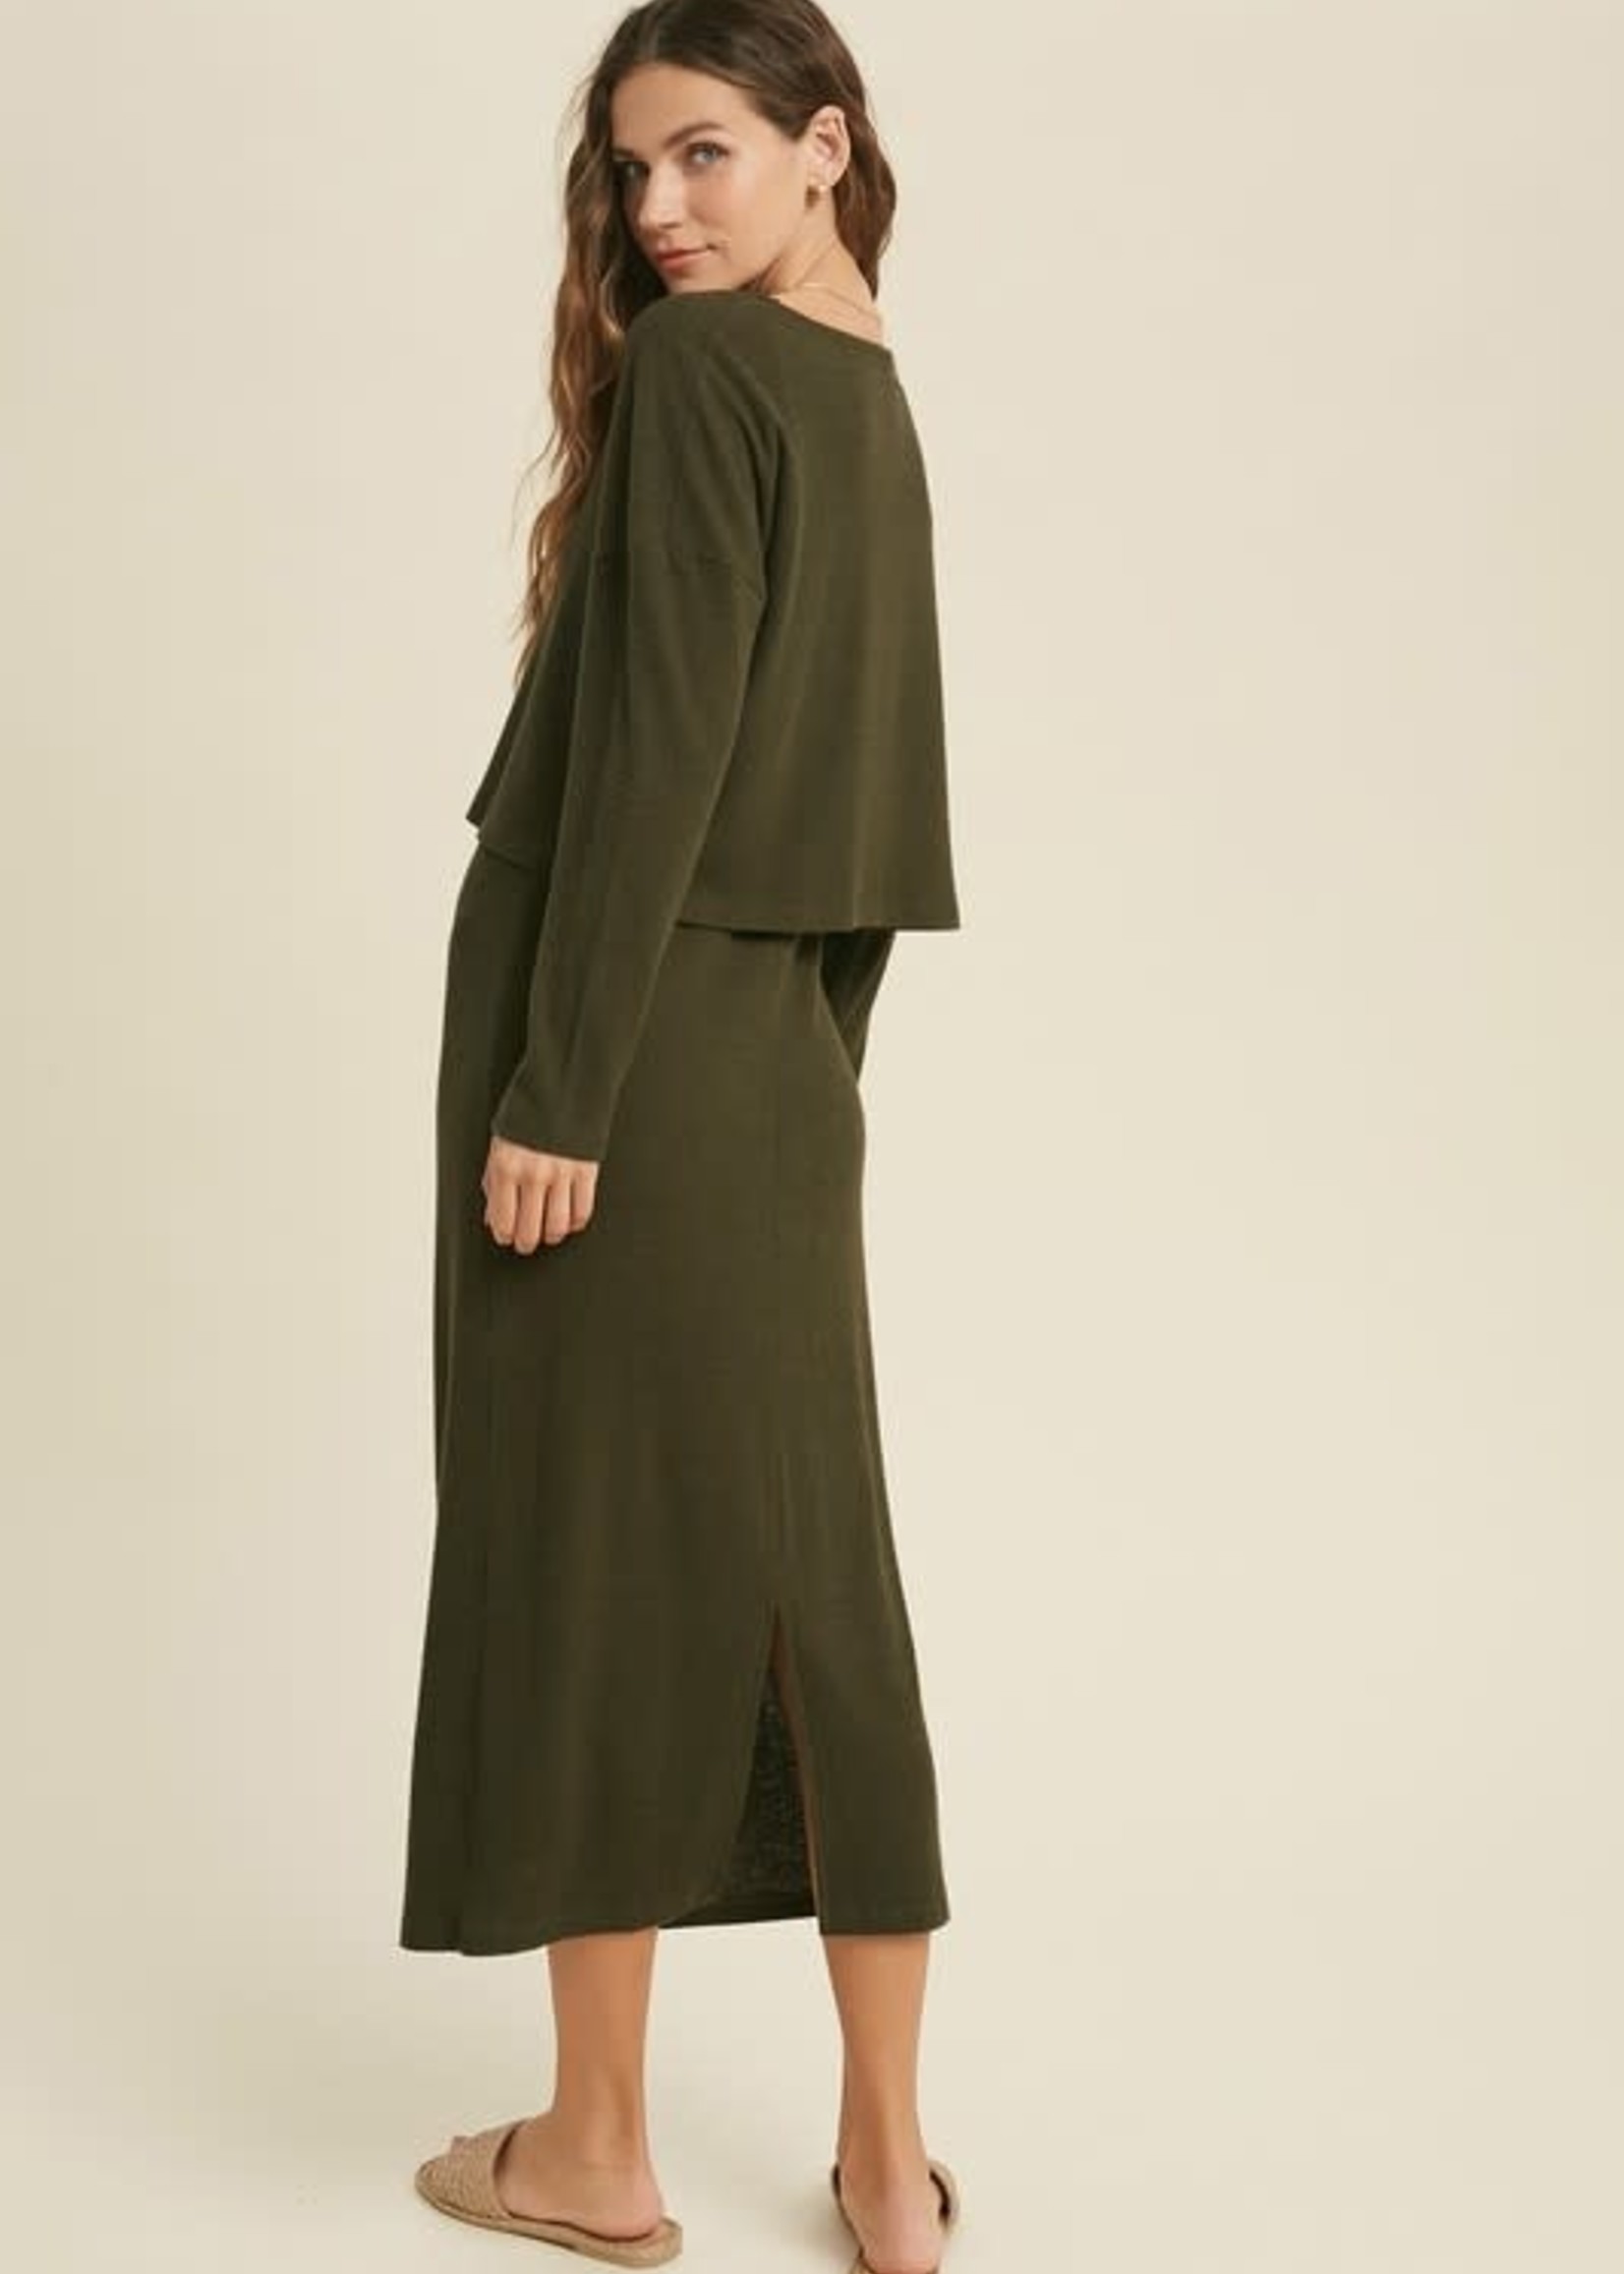 Ribbed Two Piece Dress - Olive